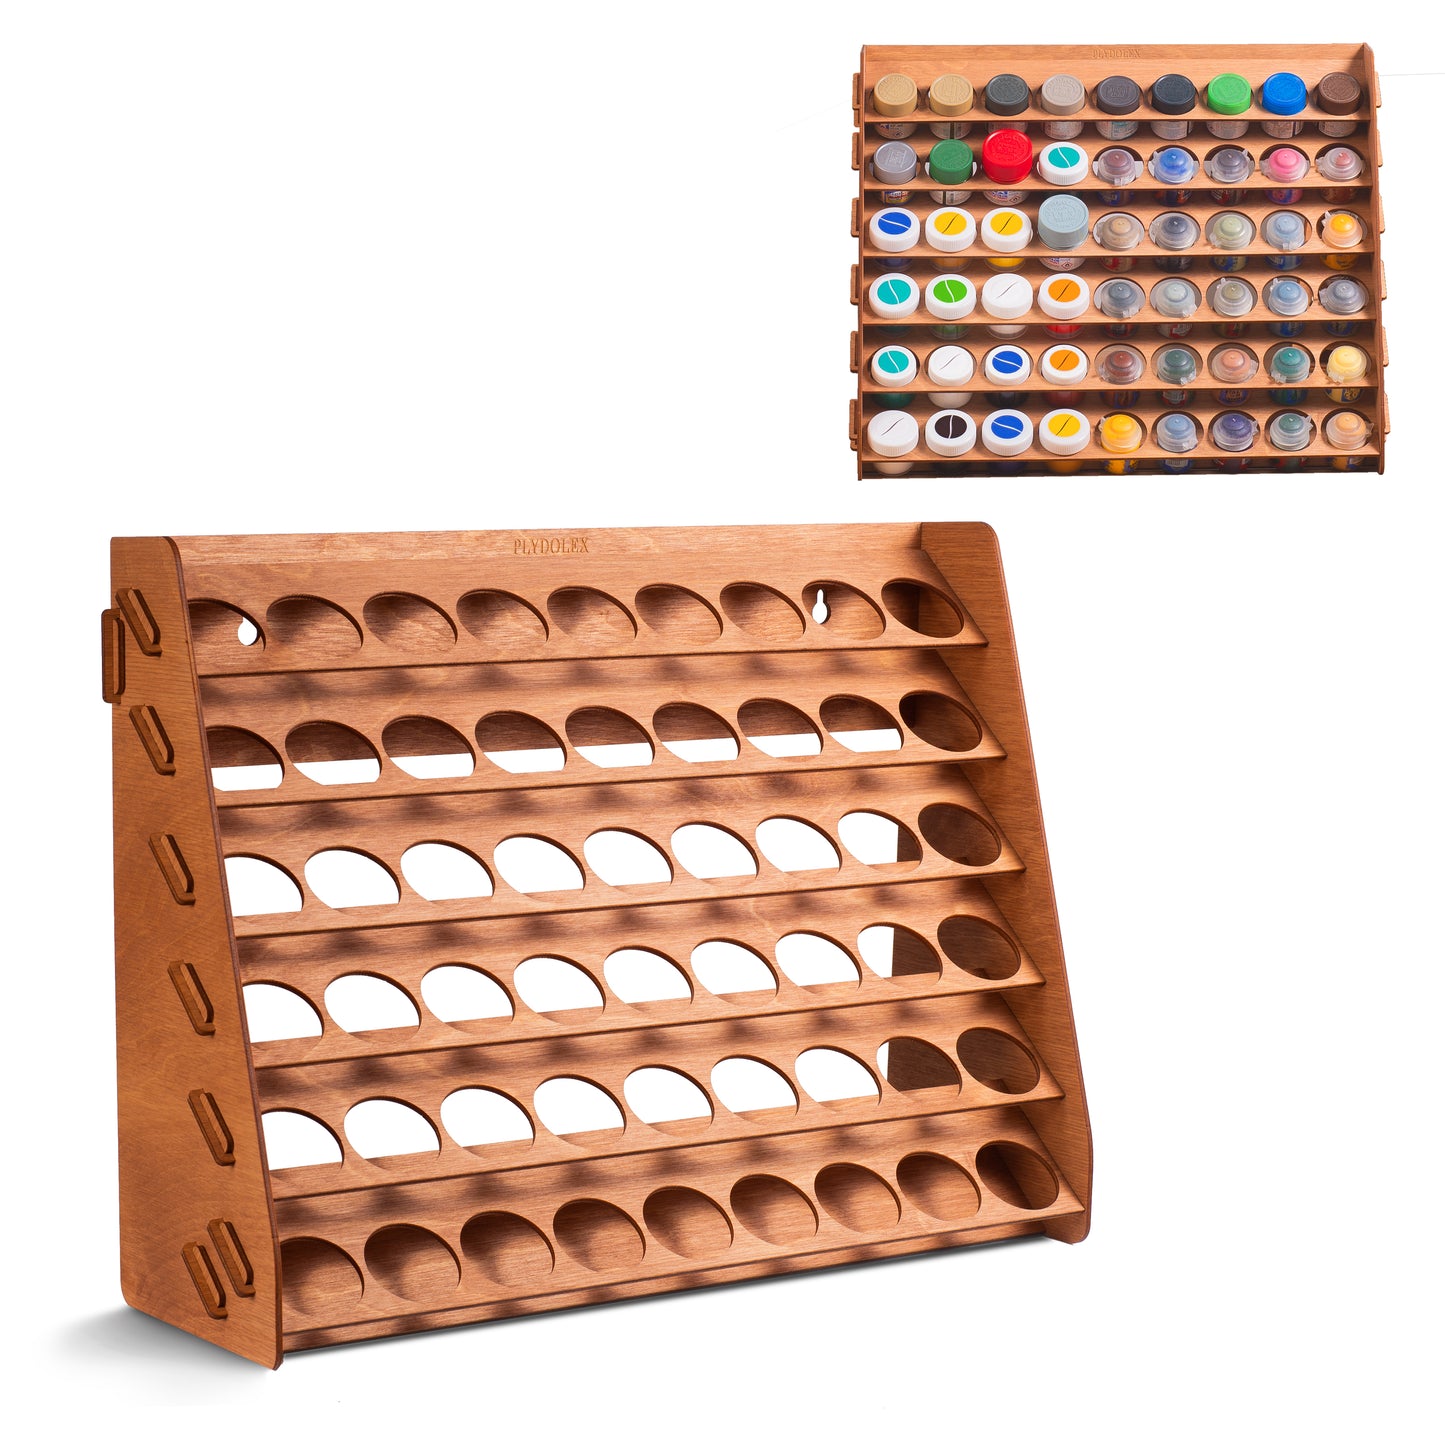 PLYDOLEX Vallejo Paint Rack Organizer with 72 Holes for Miniature Pain –  Plywood Organizers for Miniaute Painters - Wooden HandCraft Gift and  Accessories by Plydolex